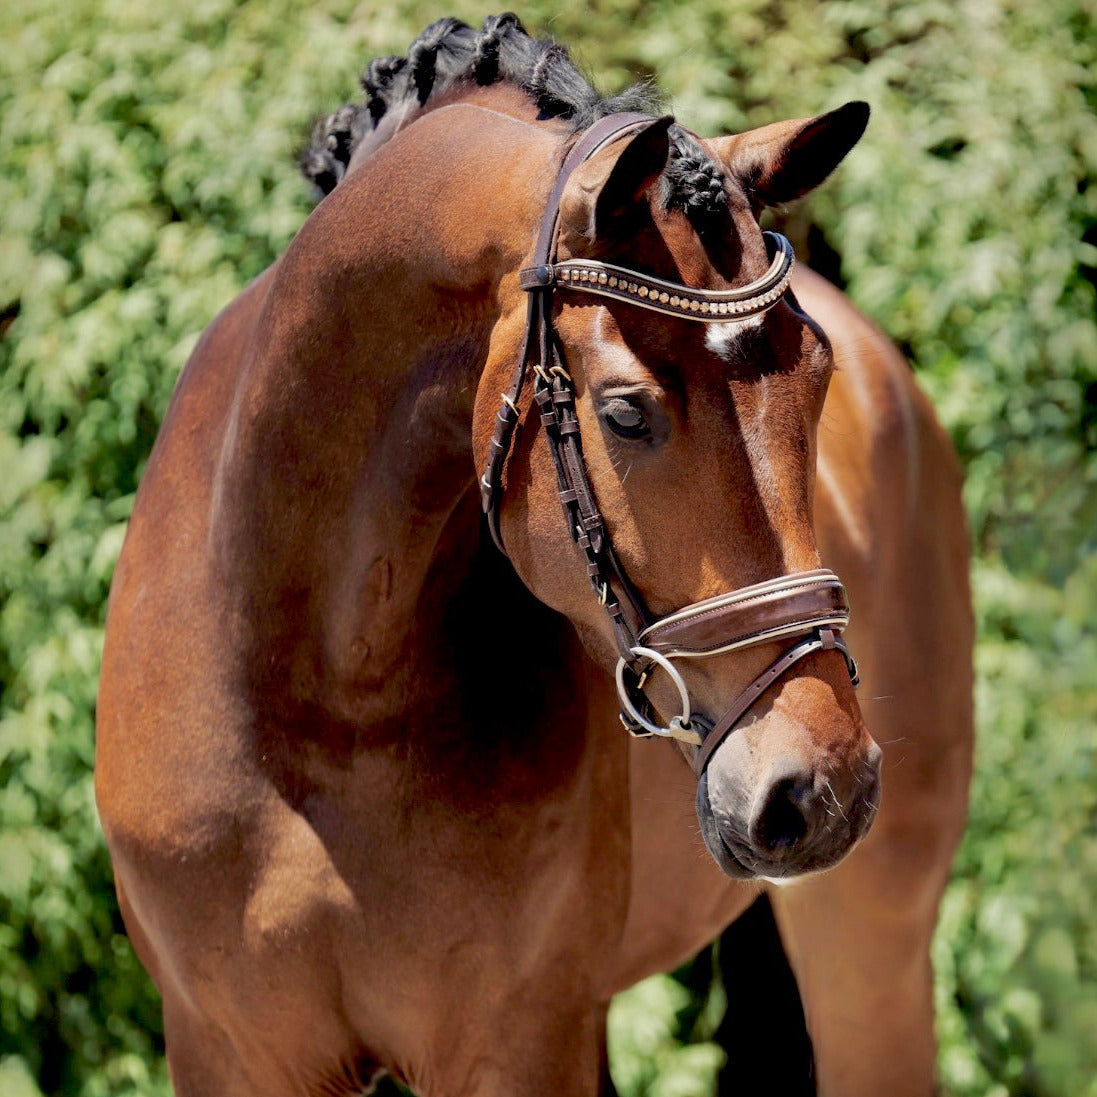 The Catalonia Metallic Bronze Leather Snaffle Bridle with Removable Flash